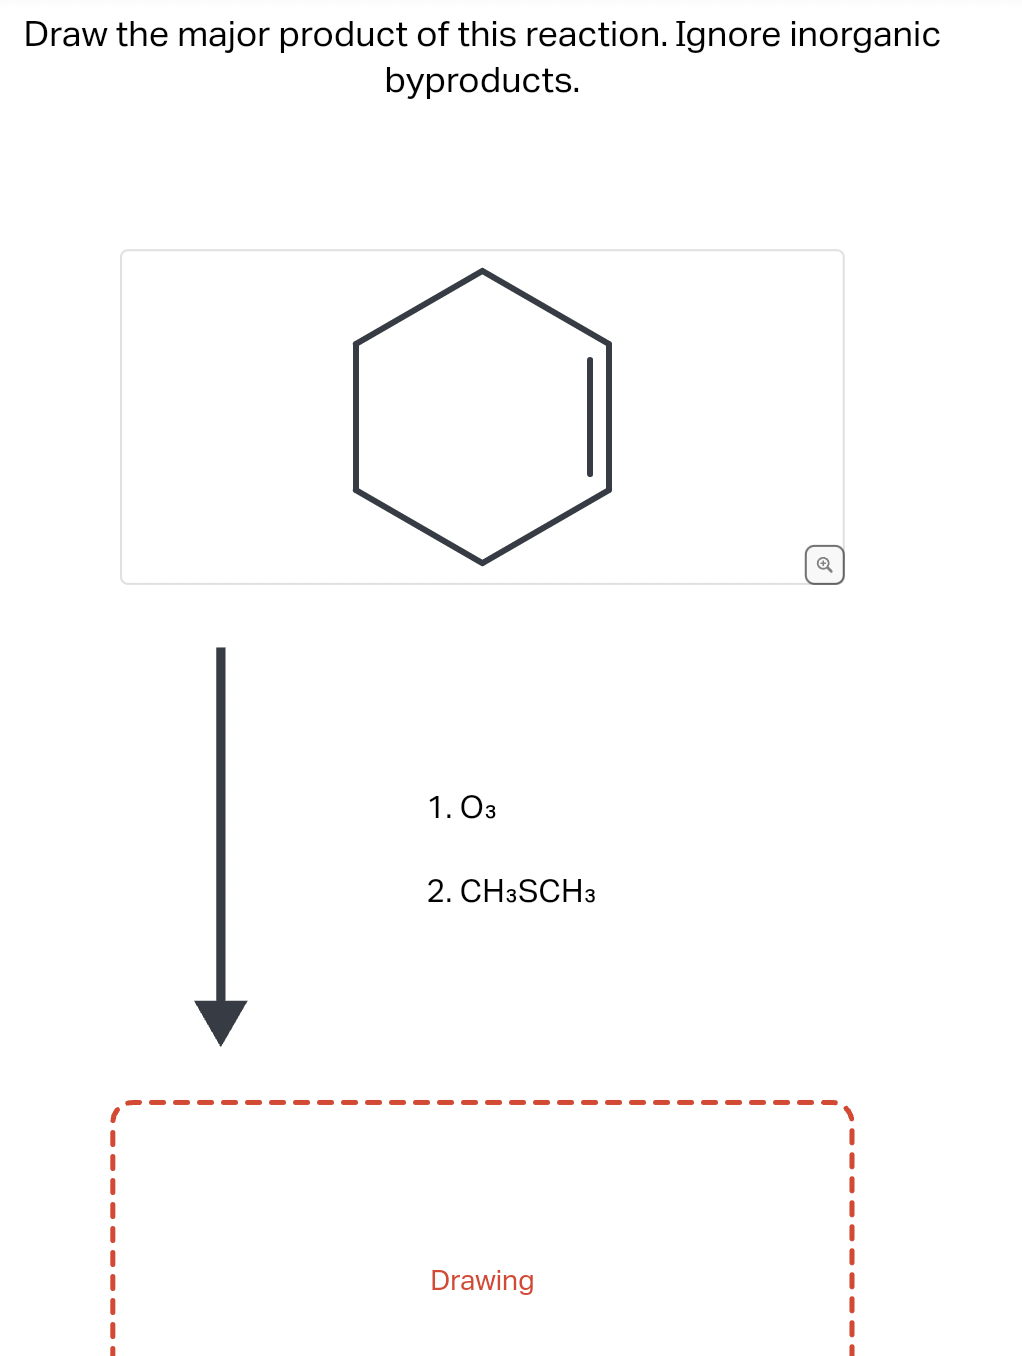 Draw the major product of this reaction. Ignore inorganic
byproducts.
1.03
2. CH3SCH3
Drawing
Q